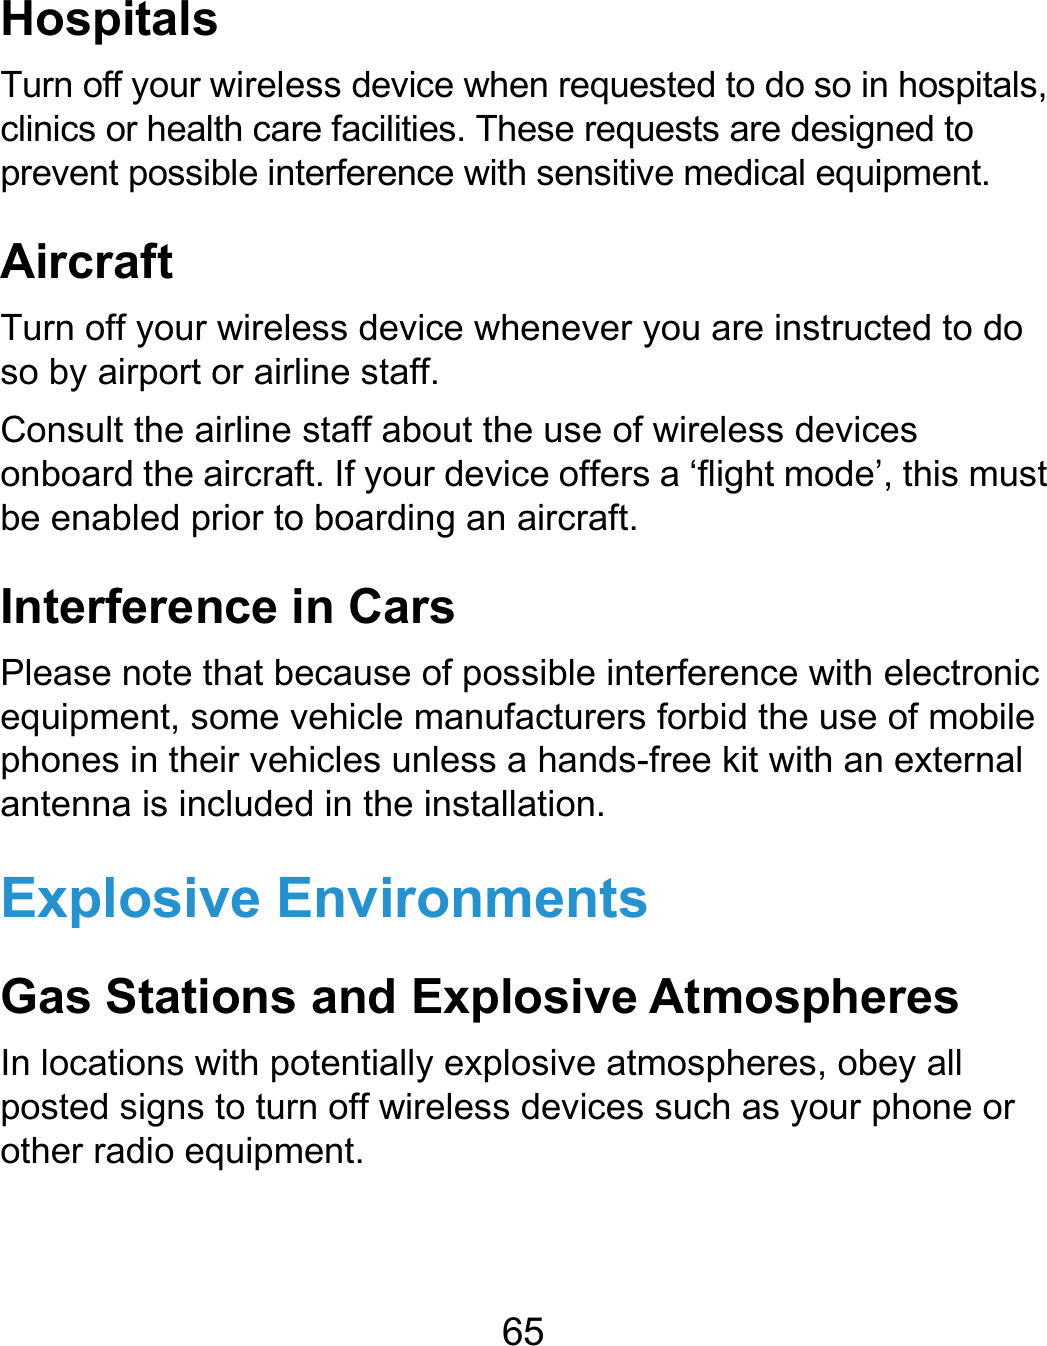  65 Hospitals Turn off your wireless device when requested to do so in hospitals, clinics or health care facilities. These requests are designed to prevent possible interference with sensitive medical equipment. Aircraft Turn off your wireless device whenever you are instructed to do so by airport or airline staff. Consult the airline staff about the use of wireless devices onboard the aircraft. If your device offers a ‘flight mode’, this must be enabled prior to boarding an aircraft. Interference in Cars Please note that because of possible interference with electronic equipment, some vehicle manufacturers forbid the use of mobile phones in their vehicles unless a hands-free kit with an external antenna is included in the installation. Explosive Environments Gas Stations and Explosive Atmospheres In locations with potentially explosive atmospheres, obey all posted signs to turn off wireless devices such as your phone or other radio equipment.  